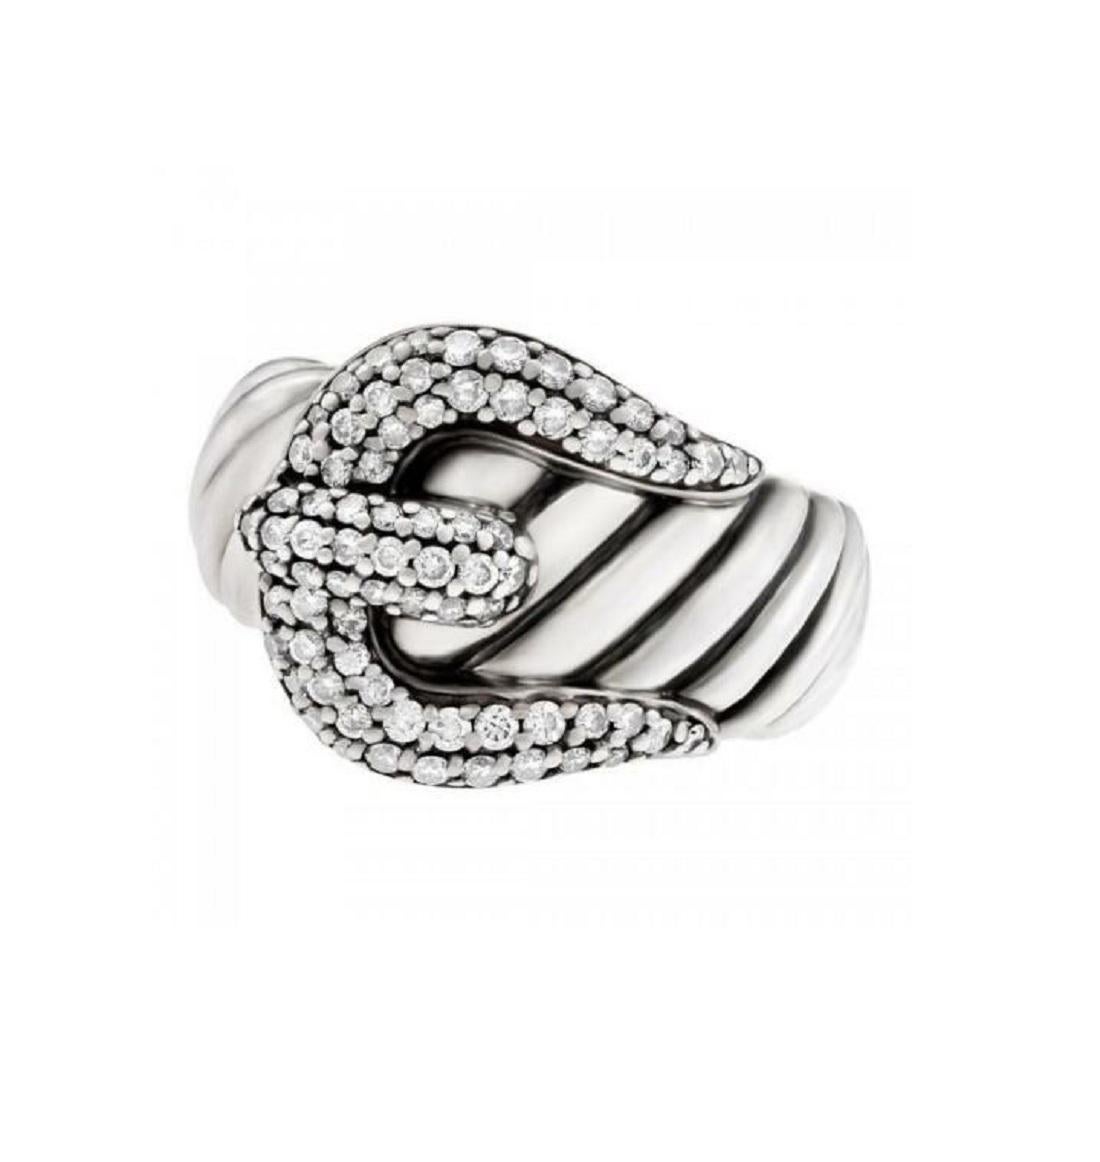 New, no tags
Sterling silver
Pave Diamond
Ring size: 5
Ring width: 6-16mm
Comes with David Yurman  pouch
Original Retail: $700